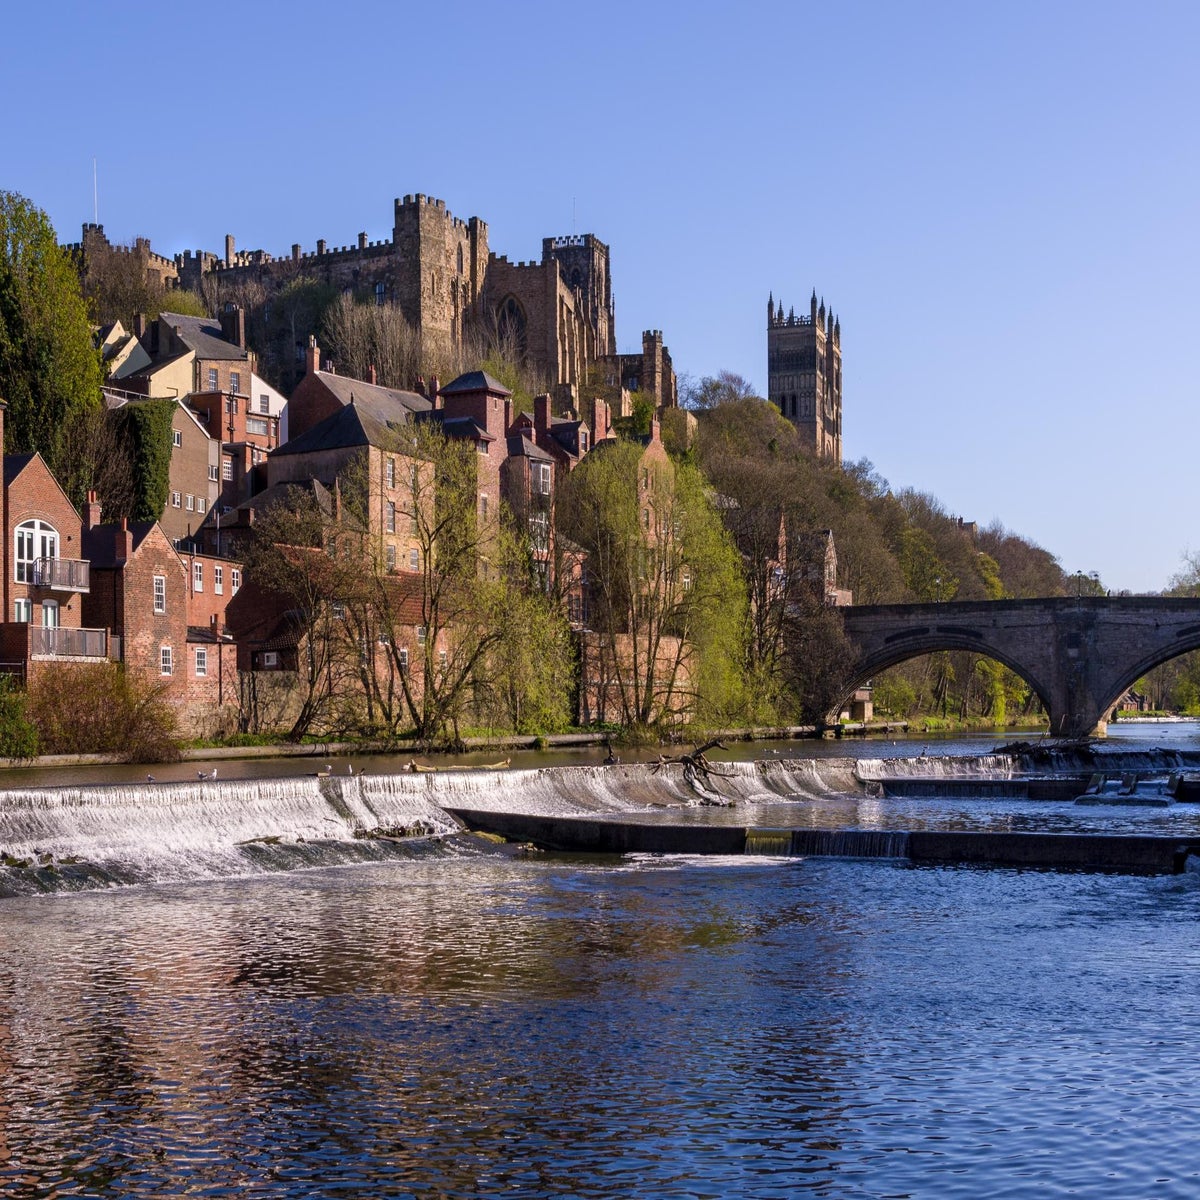 https://static.independent.co.uk/s3fs-public/thumbnails/image/2020/02/24/13/river-wear-durham.jpg?width=1200&height=1200&fit=crop